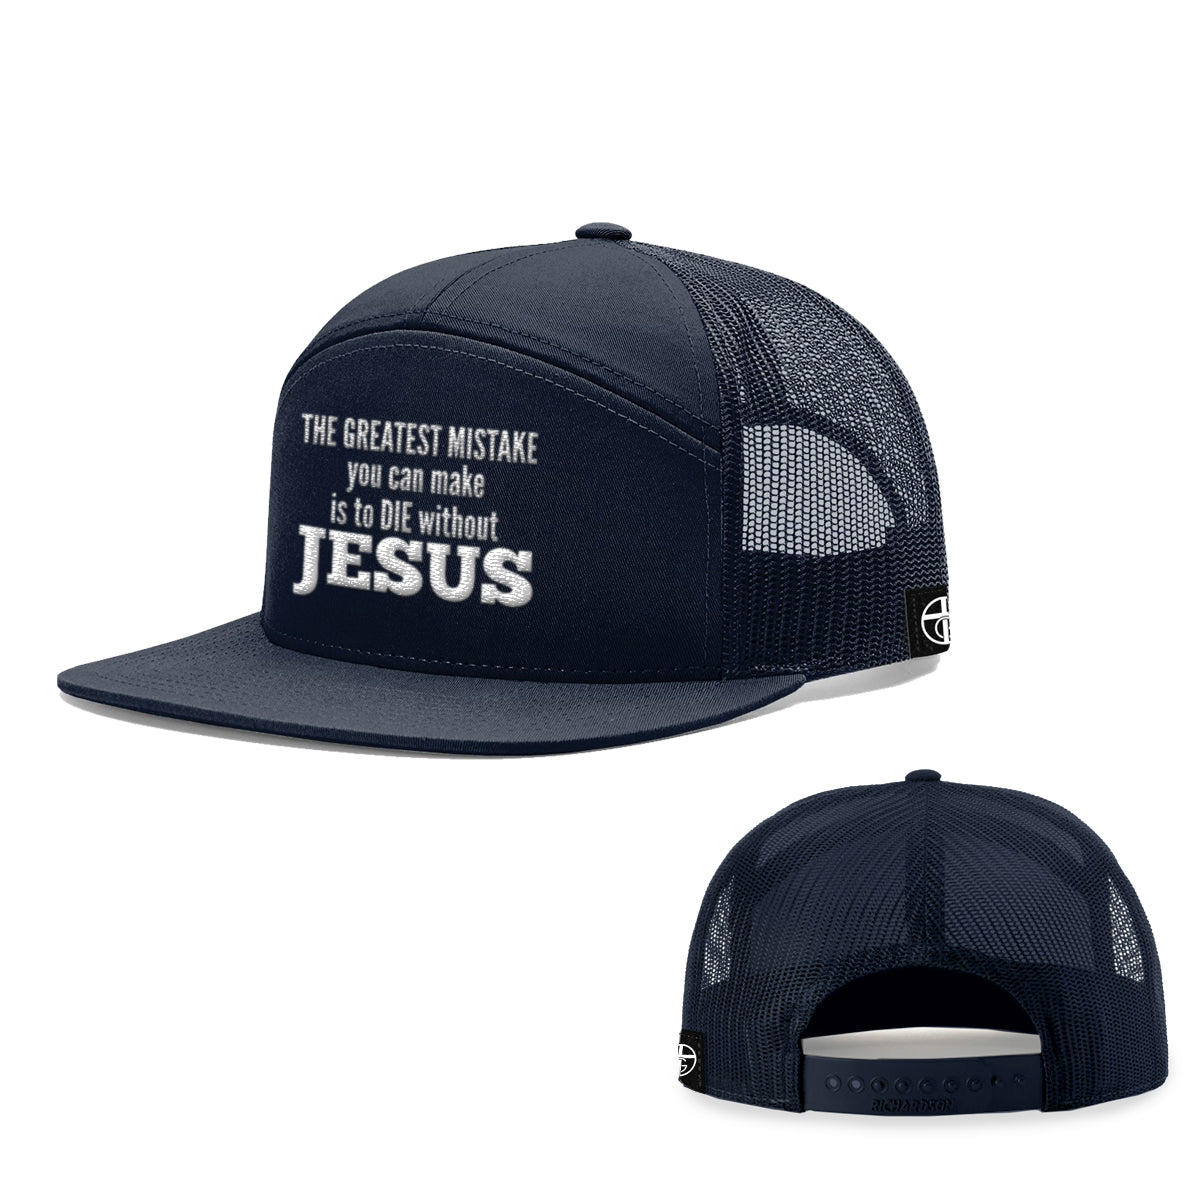 The Greatest Mistake 7 Panel Hats